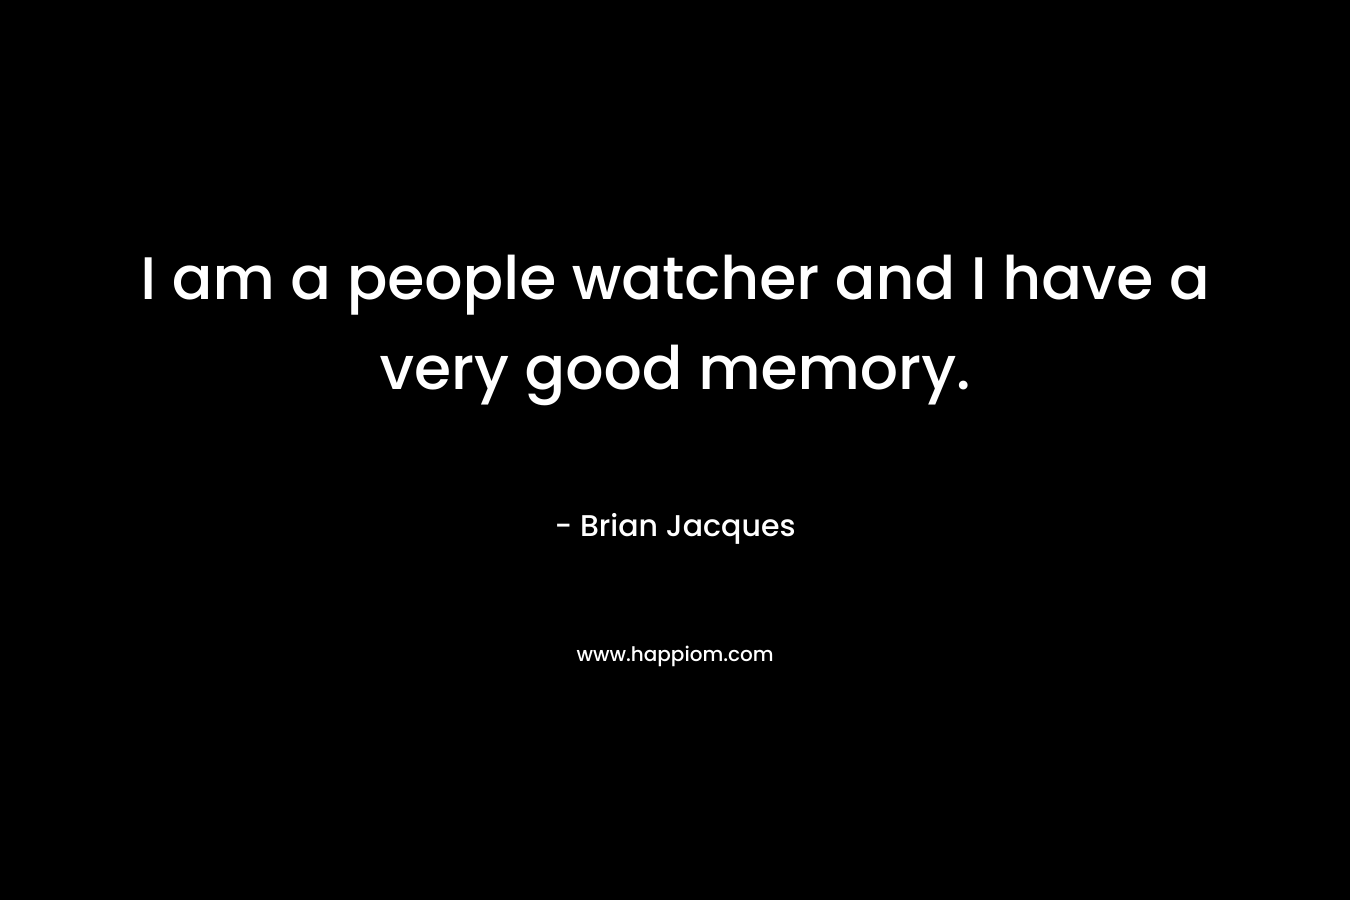 I am a people watcher and I have a very good memory.